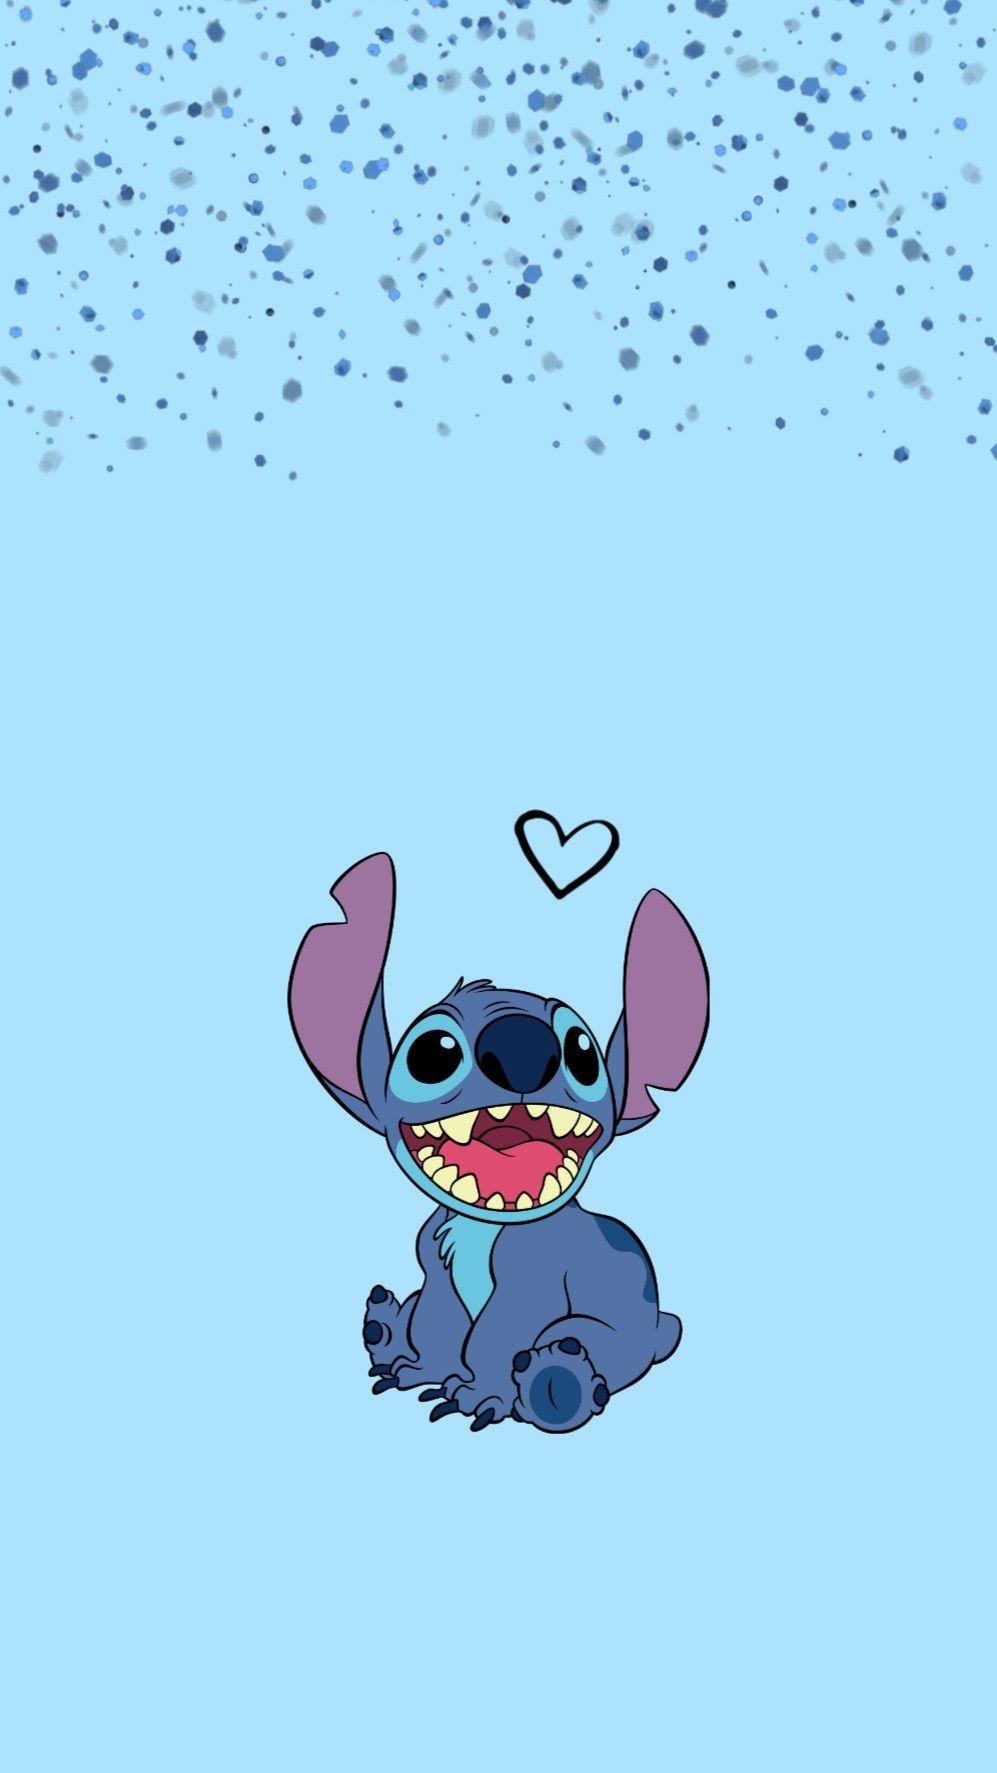 Aesthetic Stitch Disney Wallpapers - Top Free Aesthetic Stitch Disney